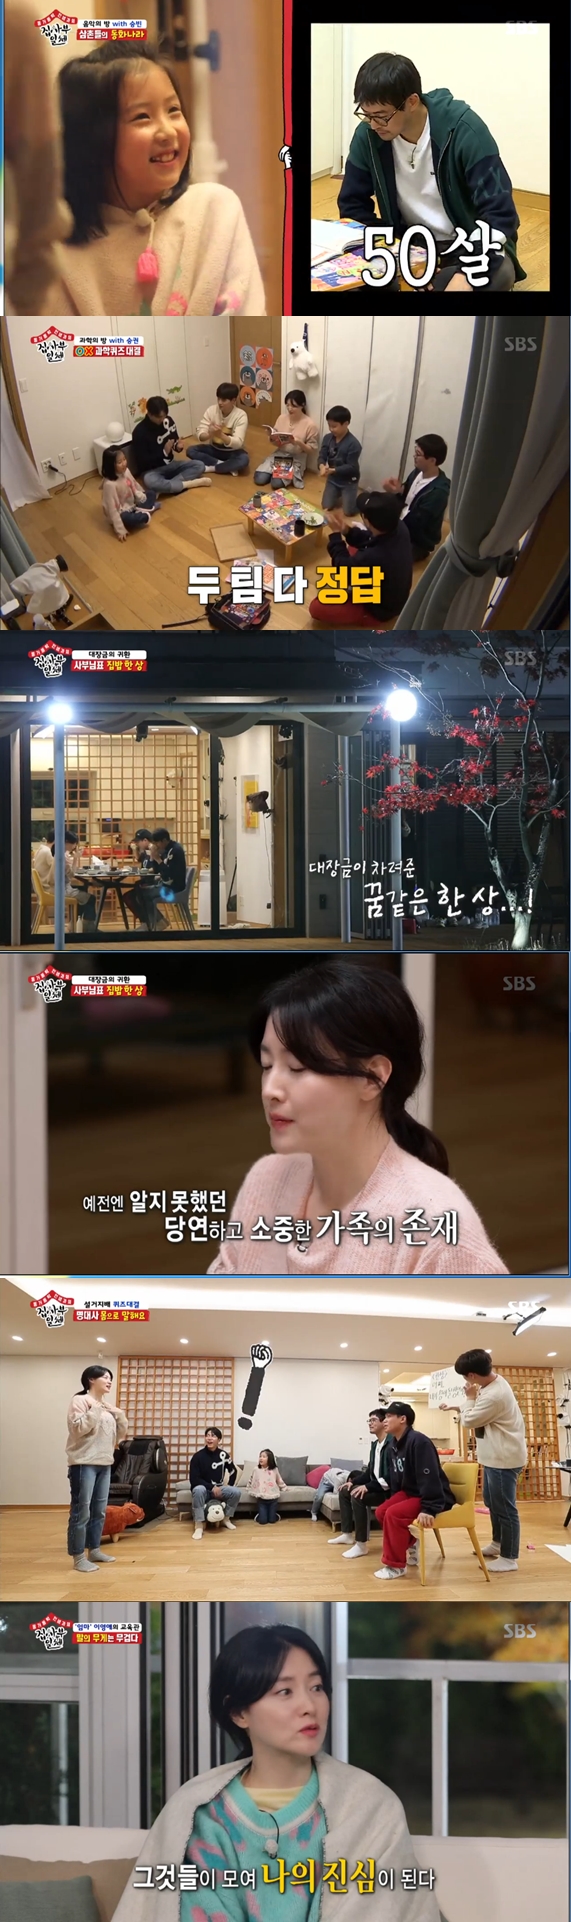 Lee Yeong-ae has highlighted the importance of warm words.In the SBS entertainment program All The Butlers broadcasted on the night of the 1st, She like oxygen Lee Yeong-ae came out as a master and spent a day with the members.While Lee Yeong-ae prepared dinner, Yook Sungjae and Lee Seung-gi played with her daughter Seung Bin, who handed the two Elsa dressing tools.Yook Sungjae quickly turned into Elsa with the tool brought by Seung Bin.Lee Seung-gi asked, Have you ever been on stage like this? And Yook Sungjae summoned SIX CASH, saying, I think I did it in LA.Yook Sungjae sang Let It Go for Seung Bin Lee, who played fictional piano to further shine the stage of Yook Sungjae.Seung Bin, who saw the stage of the two people, cheered loudly, saying, The Uncles are so funny. Seung Bin sang Aladdin songs for the Uncles.At that point Lee Yeong-ae came into the room with a handmade cabbage.Yang Se-hyeong, who came in with Lee Yeong-ae, was surprised to hear the song of Seung Bin and could not shut up.Seung Bin told Lee Yeong-ae, The two Uncles played well, and made her feel good.Seung Bin said Lee Seung-gi and Yook Sungjae were in their early 20s, making the two feel good.While Lee Sang-yoon was a 50-year-old, he laughed frankly.Meanwhile, Lee Yeong-ae came into the room with a cabbage battle for Lee Sang-yoon and a science-studying winner, who was a dream child to become a scientist.Lee Yeong-ae, who saw Lee Sang-yoon and his hard-working son, was careful, saying, Why are you so quiet here?Lee Sang-yoon praised the winner for his passion for science.Lee Yeong-ae turned into a parent and asked, I dont know how to educate a child.Lee Sang-yoon replied, The child really needs to do it, and Lee Yeong-ae took this seriously.Yang Se-hyeong, who was next to him, also said, I did not want to do it when my mother told me to study when I was a child.Lee Sang-yoon improvised and pursued a science common sense showdown between Yang Se-hyeong and Seung Kwon-i.Yang Se-hyeong said, However, I will lose to the child. However, Yang Se-hyeong laughed at the defeat of the winner.At that time, Seung Bin, Lee Seung-gi, and Yook Sungjae came in, and they divided the team and played a science common sense quiz showdown.The winner, as a child dreaming of a scientist, had the right answer in logical reasoning: Seung Bin had the right answer in his own way, but their attitudes were so different.Lee Seung-gi, who saw this, said, I am a brother and sister, but my tendency is really different.Looking at the children with two completely different tendencies, Lee Yeong-ae smiled with delight.After a short-lived science quiz showdown, Lee Yeong-ae and the members went down to the restaurant to eat.During the meal, members asked Lee Yeong-ae questions: Dont you regret marrying me? asked Lee Seung-gi cautiously.Lee Yeong-ae surprised everyone by saying not at all.Lee Yeong-ae expressed confidence in himself, saying, I thought I could come back anytime if I had roots.Lee Yeong-ae is the most affectionate work, and he surprised everyone by choosing same period that no one knows without choosing kind Mr. Kim or Dae Jang Geum.Many failures have brought me up, she explained.After the meal, the members made an instant dishwashing bet, when Seung Bin and Seung Kwon joined the restaurant.Lee Seung-gi and Yook Sungjae, Seung Bin Lee team, Lee Sang-yoon, Yang Se-hyeong, and Seung Kwon Lee teamed up to play Speak with your body game.The theme was to get the film line right: Game was won by Lee Sang-yoon team by one problem difference.After washing dishes, the members had tea time with Lee Yeong-ae.Lee Yeong-ae, who talked together, laughed when the members could not sympathize with the child care, pointing out that everyone should have a child and come back.Lee Yeong-ae then mentioned the importance of praise and told his colleagues not to spare praise.Yang Se-hyeong praised Park Na-rae and Lee Seung-gi for contacting Suzie on the spot.Park Na-rae laughed when Lee Yeong-ae asked me to invite him to Naraba by phone call, saying, If you come here, you can be an unfriendly Mr.Lee Yeong-ae also called his 20-year-old best friend Jang Seo-hee and gave warm praise.Finishing the tea time, Lee Yeong-ae once again emphasized the importance of a warm word to the members.She said, It is my heart to say a small word and eventually it becomes my heart. She emphasized her educational philosophy, saying, A word can be a non-su to the other party.